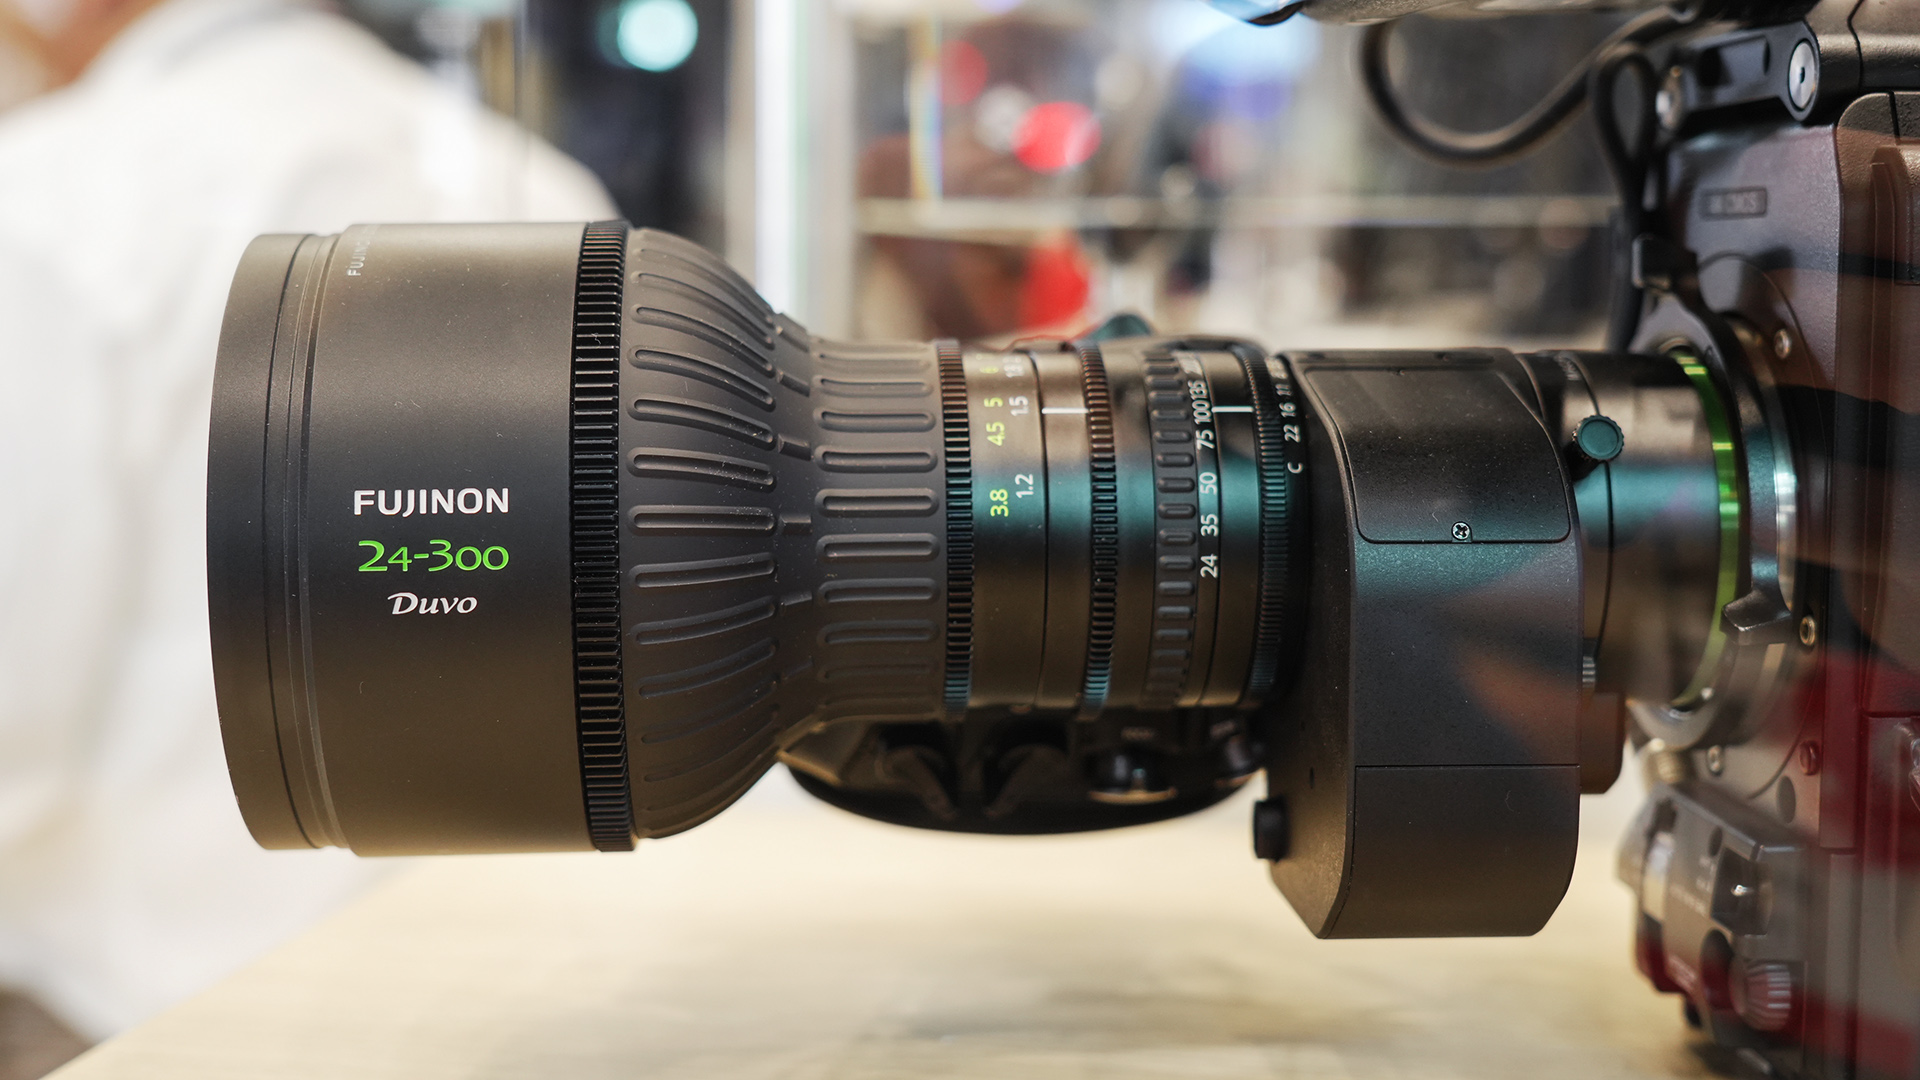 FUJINON Duvo HZK24-300mm and HZK14-100mm PL Zoom Lenses – First